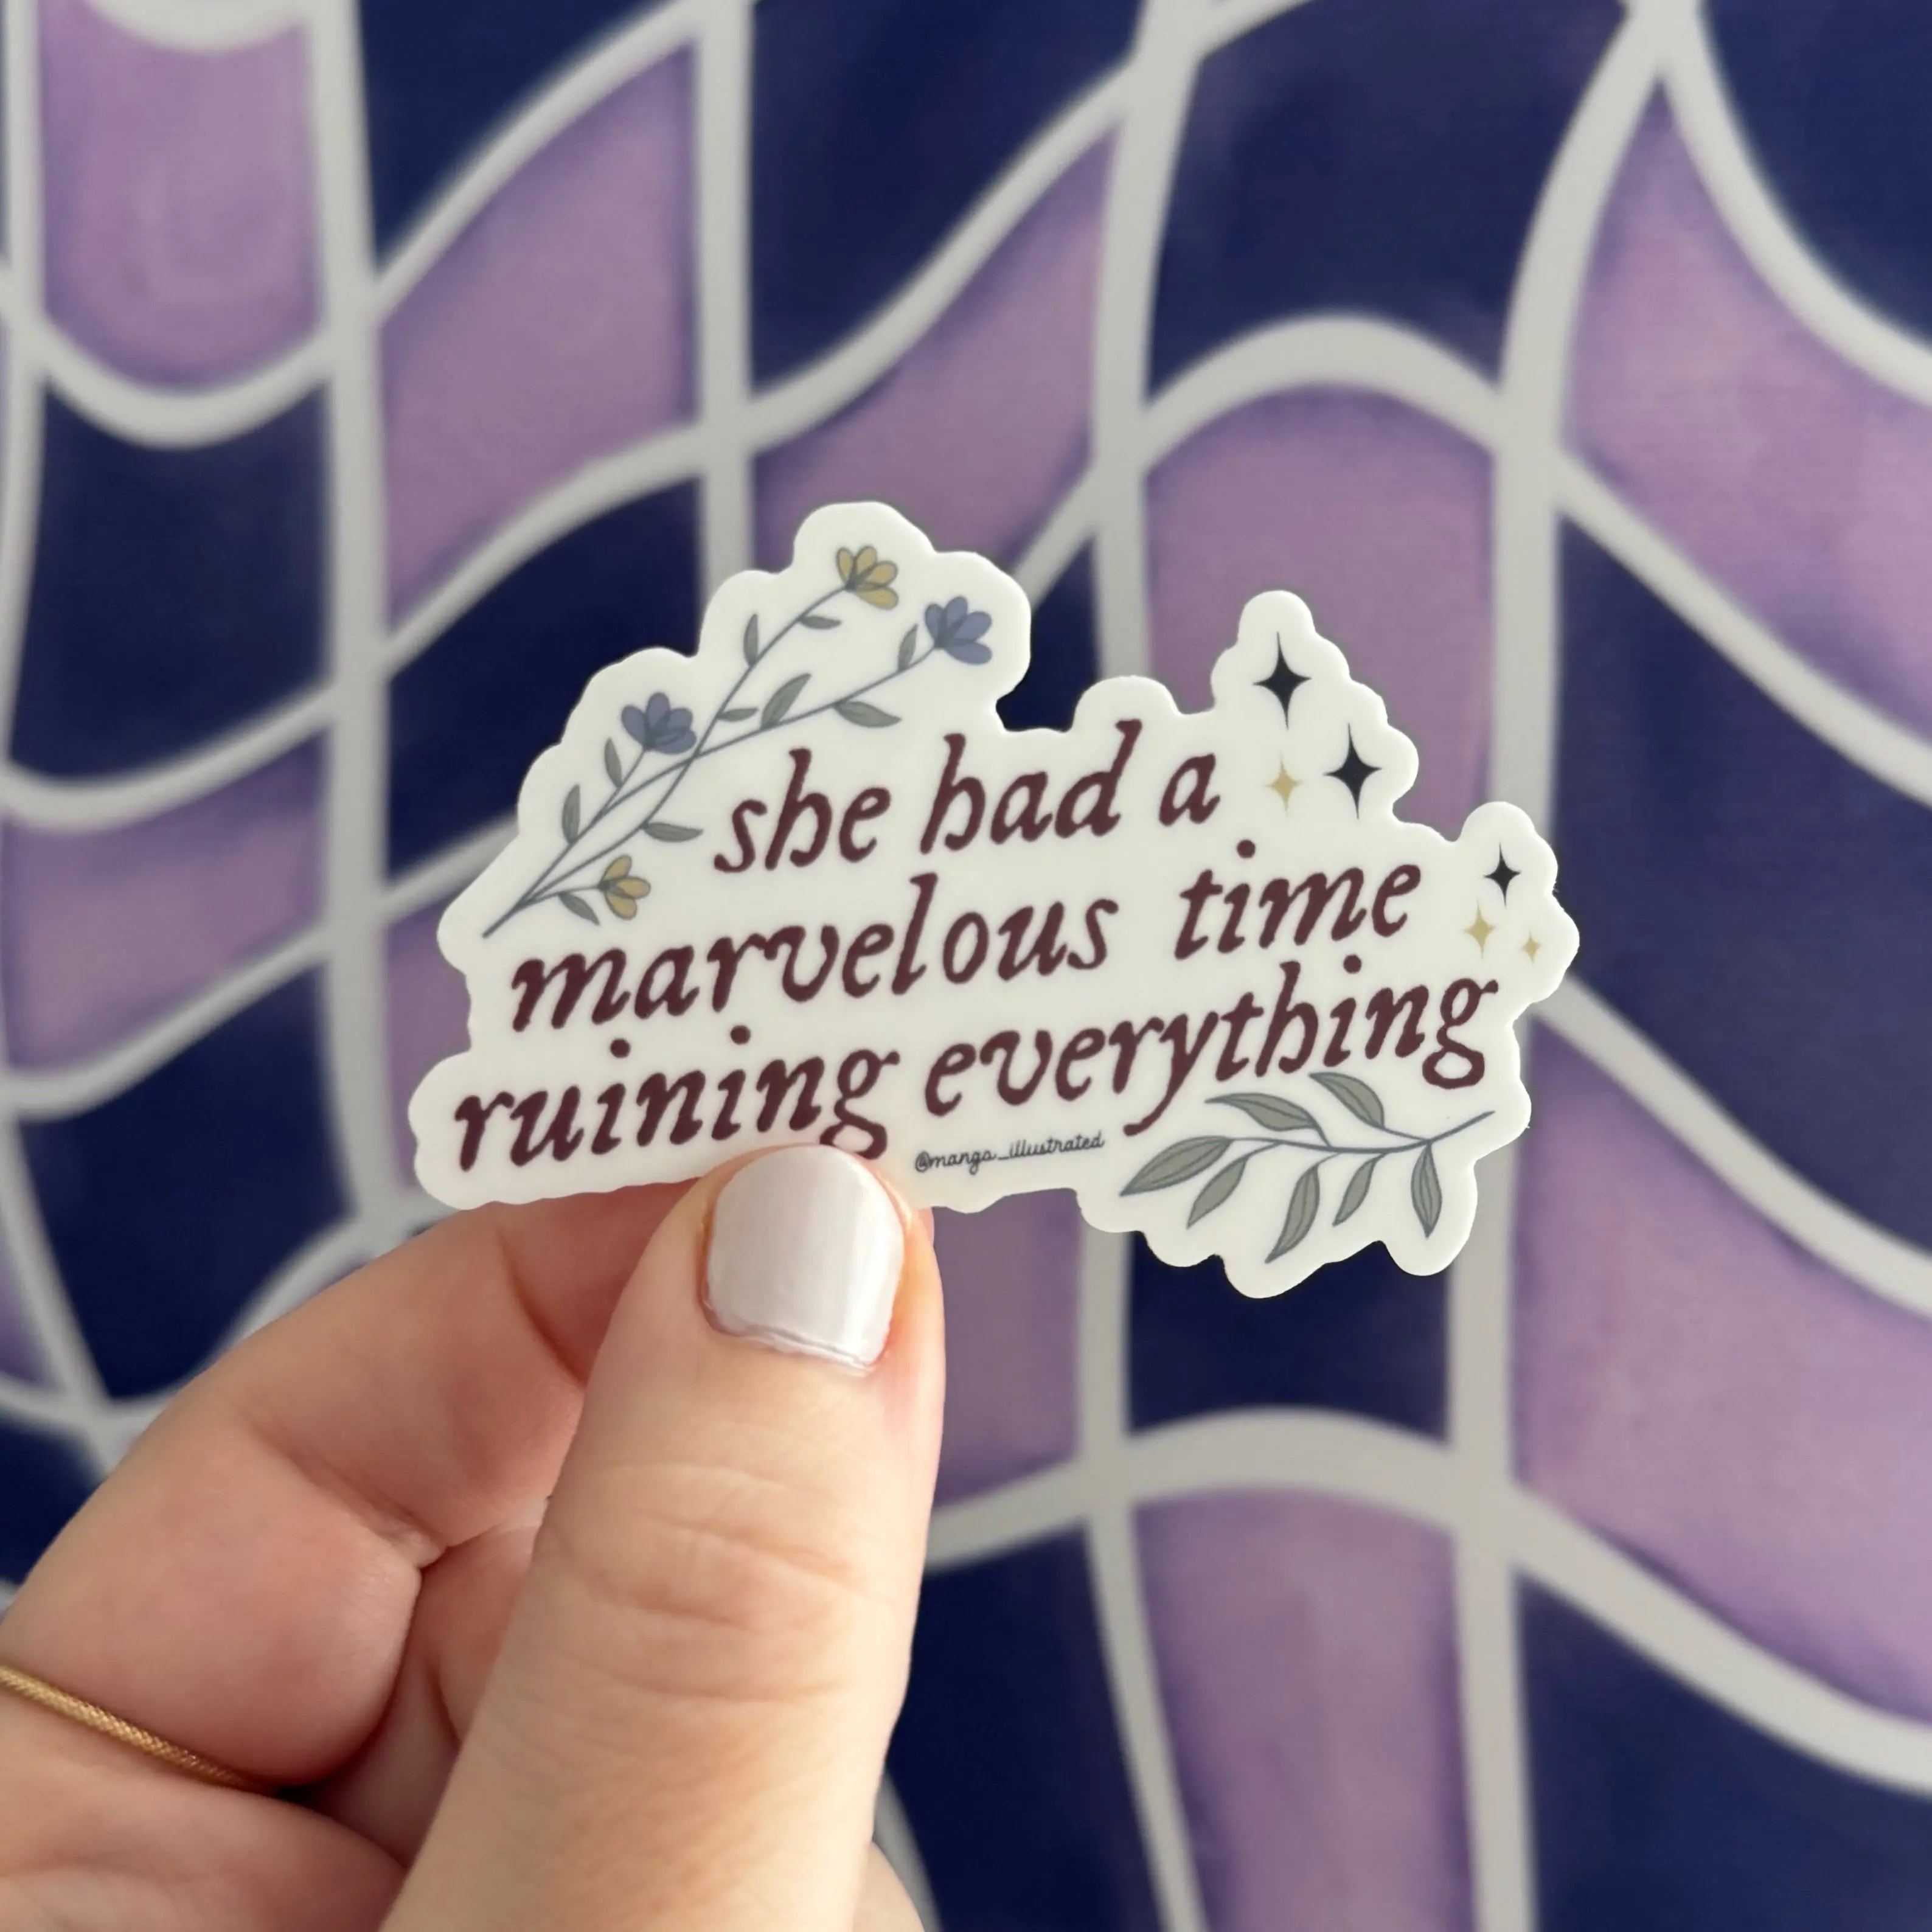 She had a marvelous time ruining everything sticker MangoIllustrated